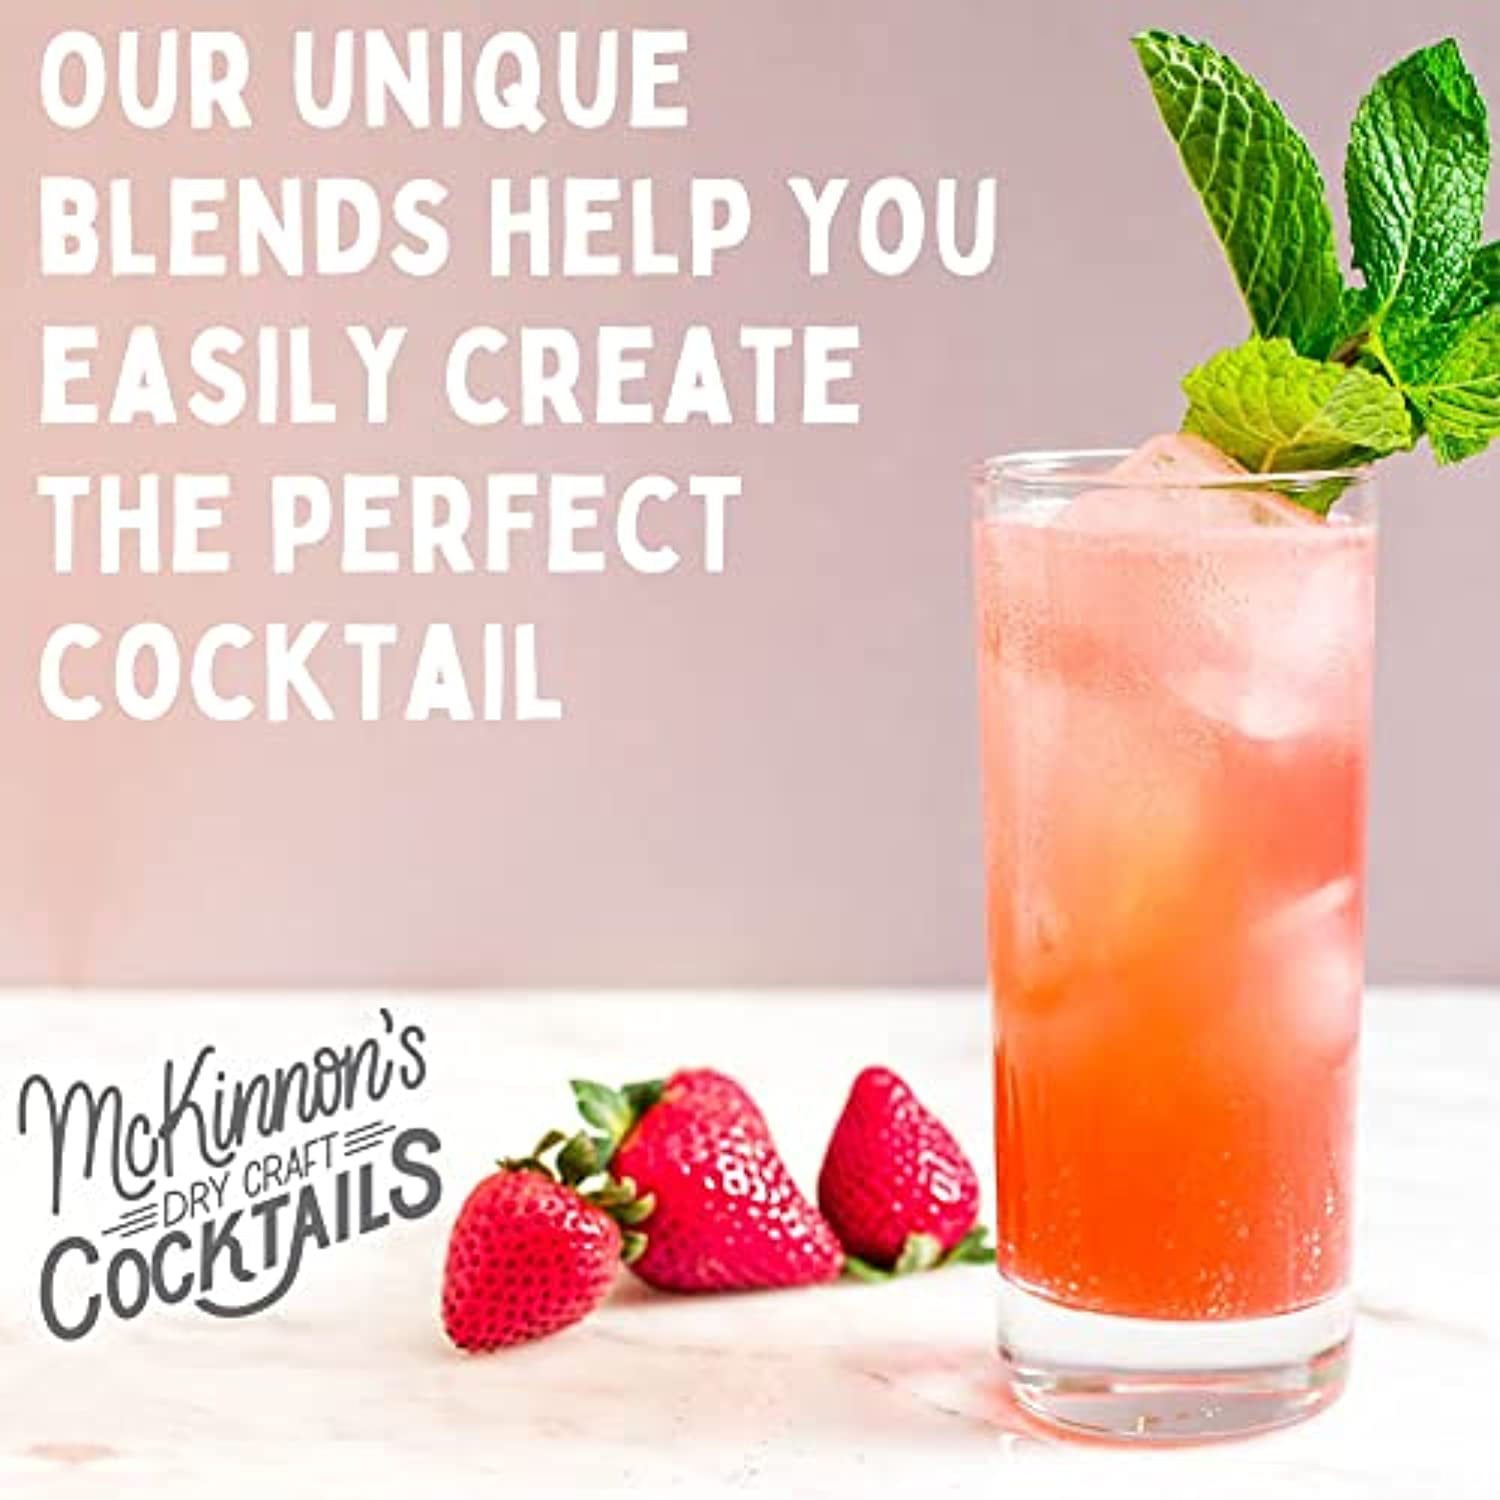 Mckinnon'S Dry Craft Cocktails, Dehydrated Fruit And Herbs, Diy Mixology, Infusion Kit, Mason Jar Serves 8 – 16 Drinks